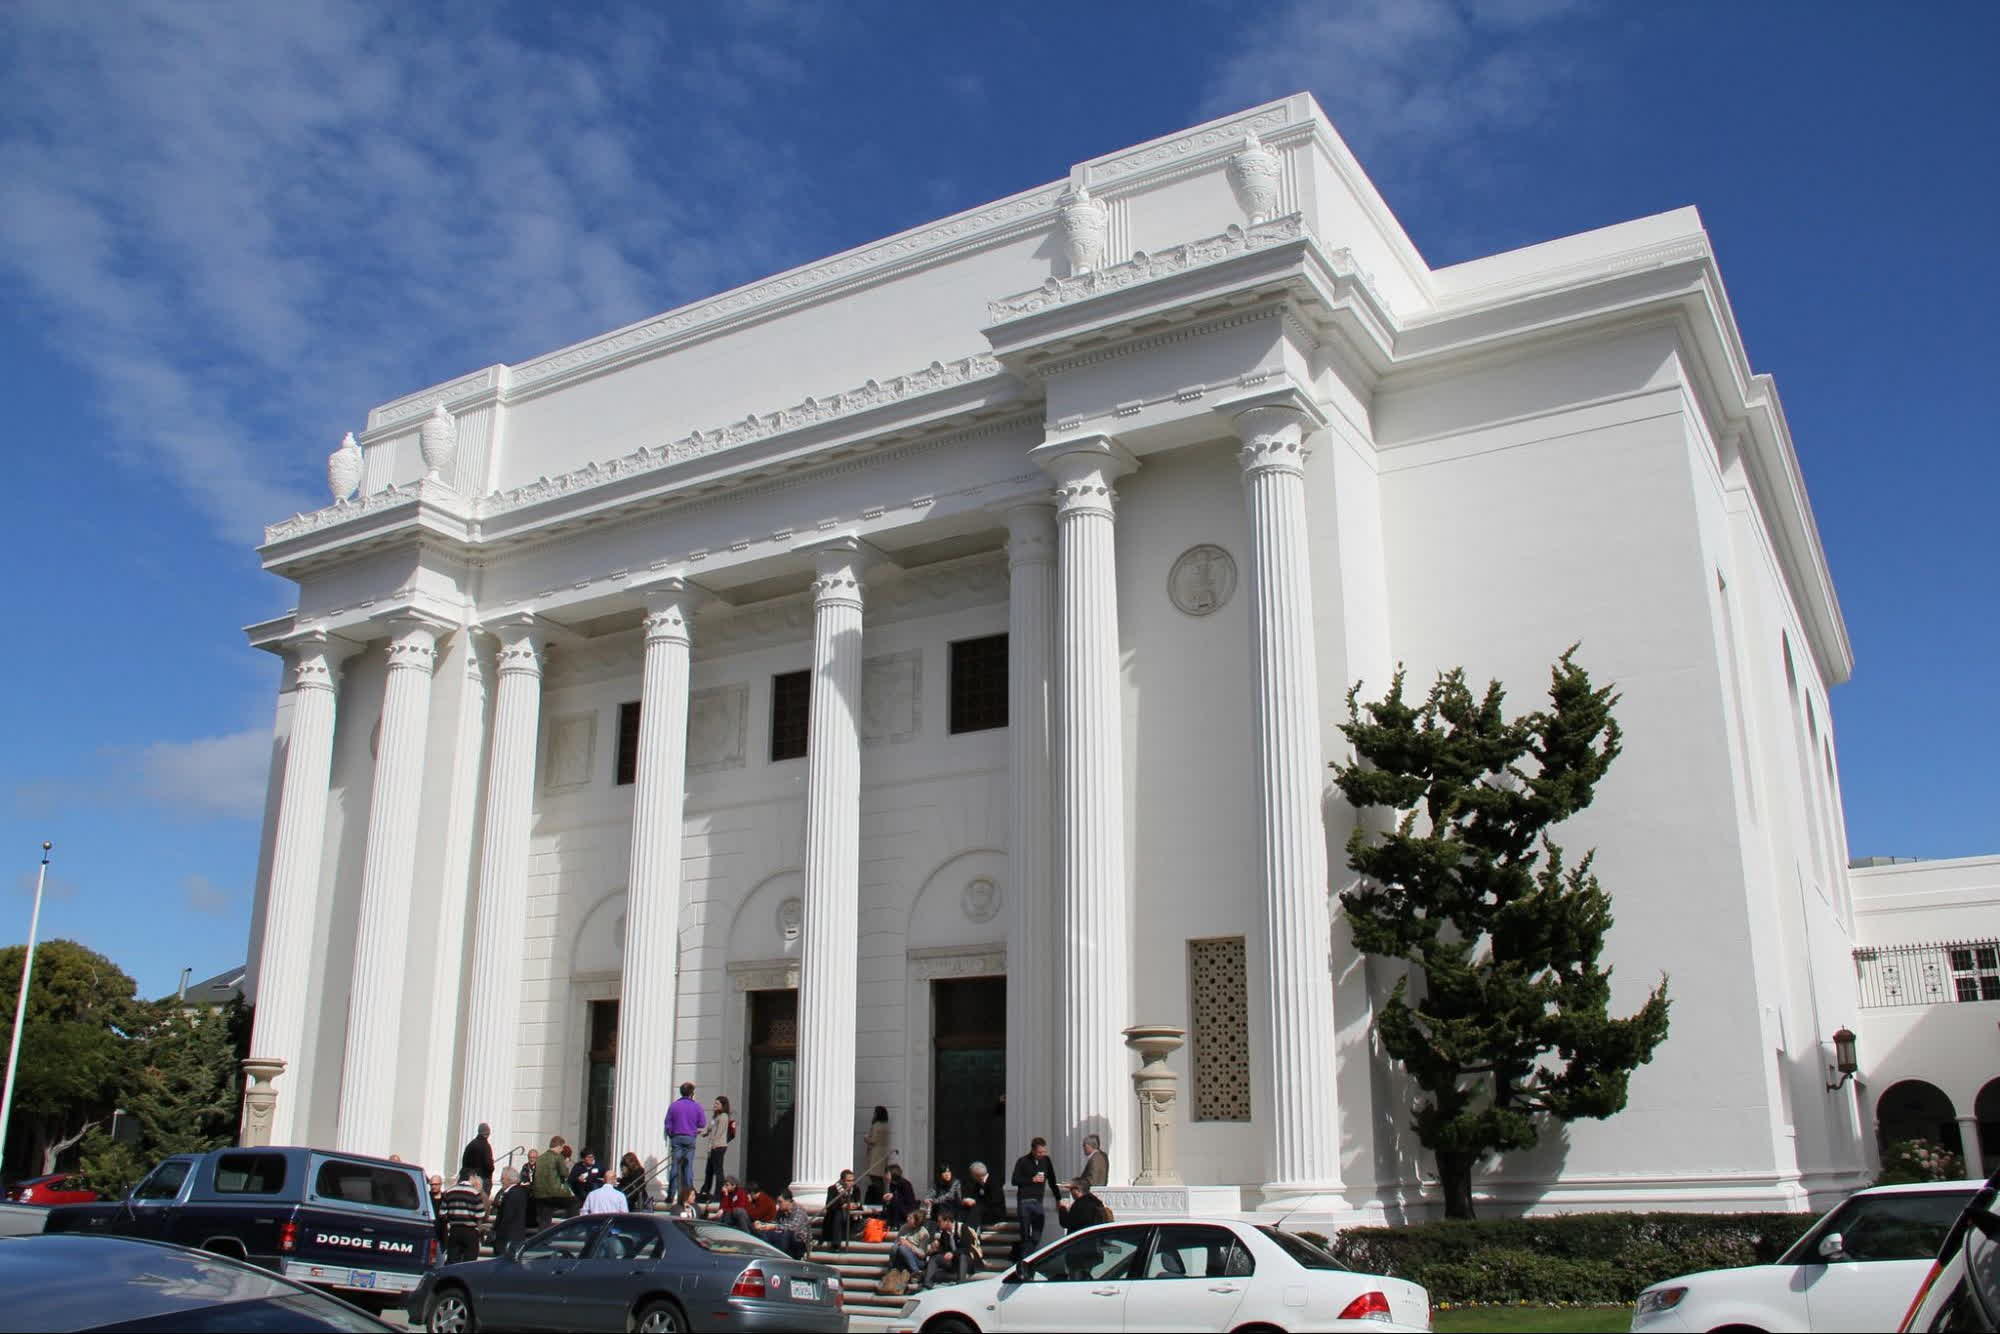 The Internet Archive reaches an agreement with publishers in digital book-lending case